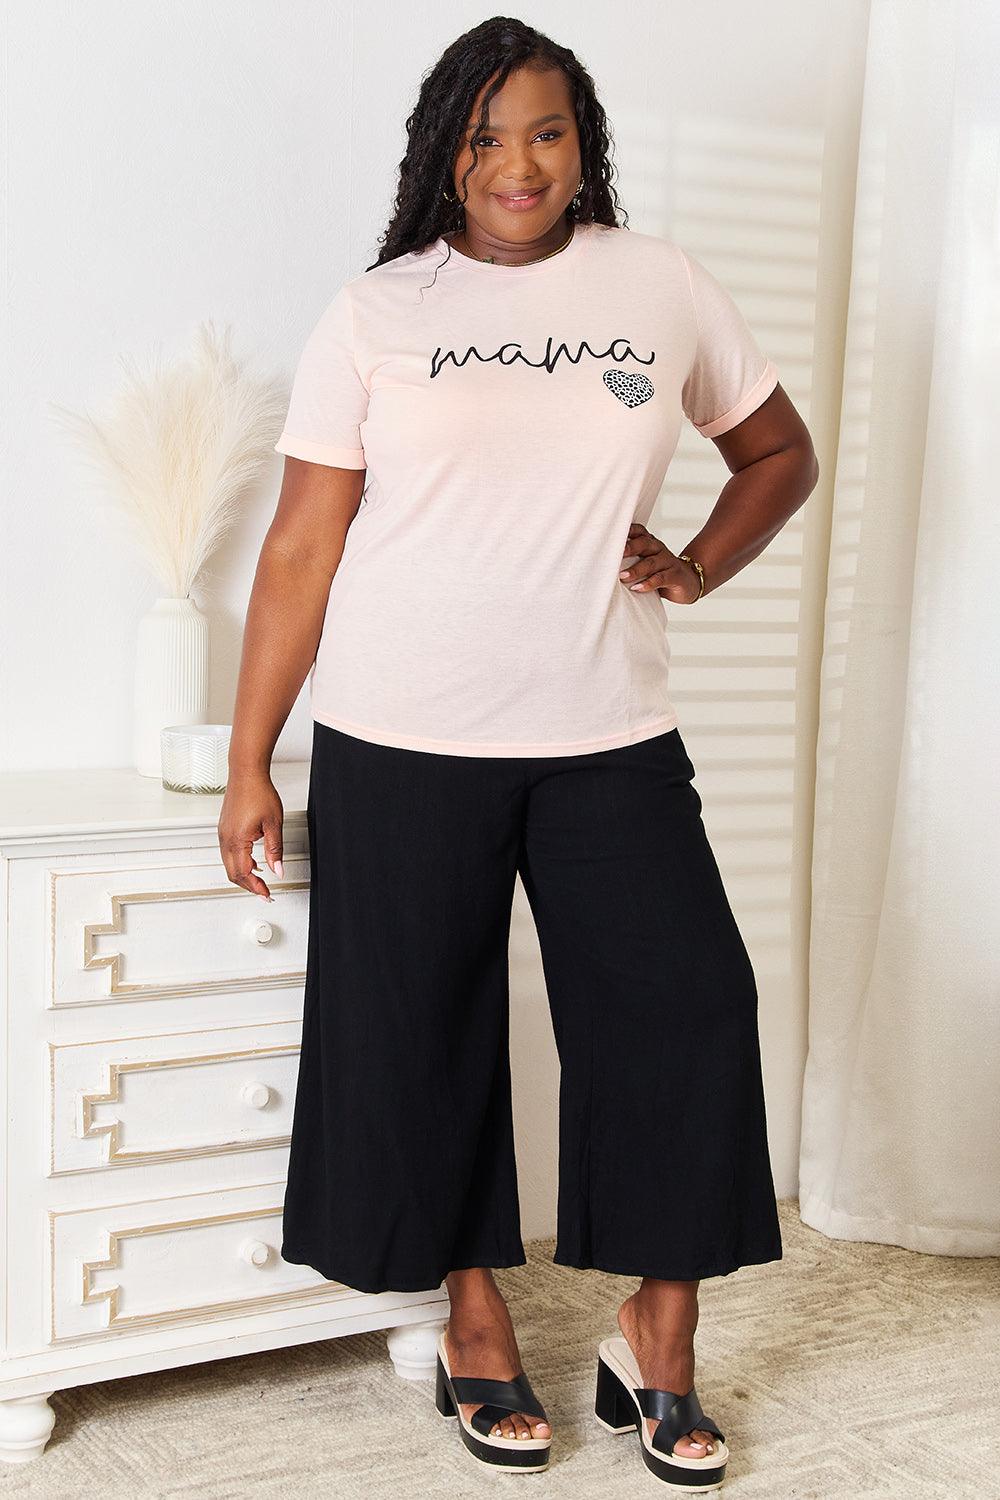 Simply Love MAMA Heart Graphic T-Shirt - Anchored Feather Boutique